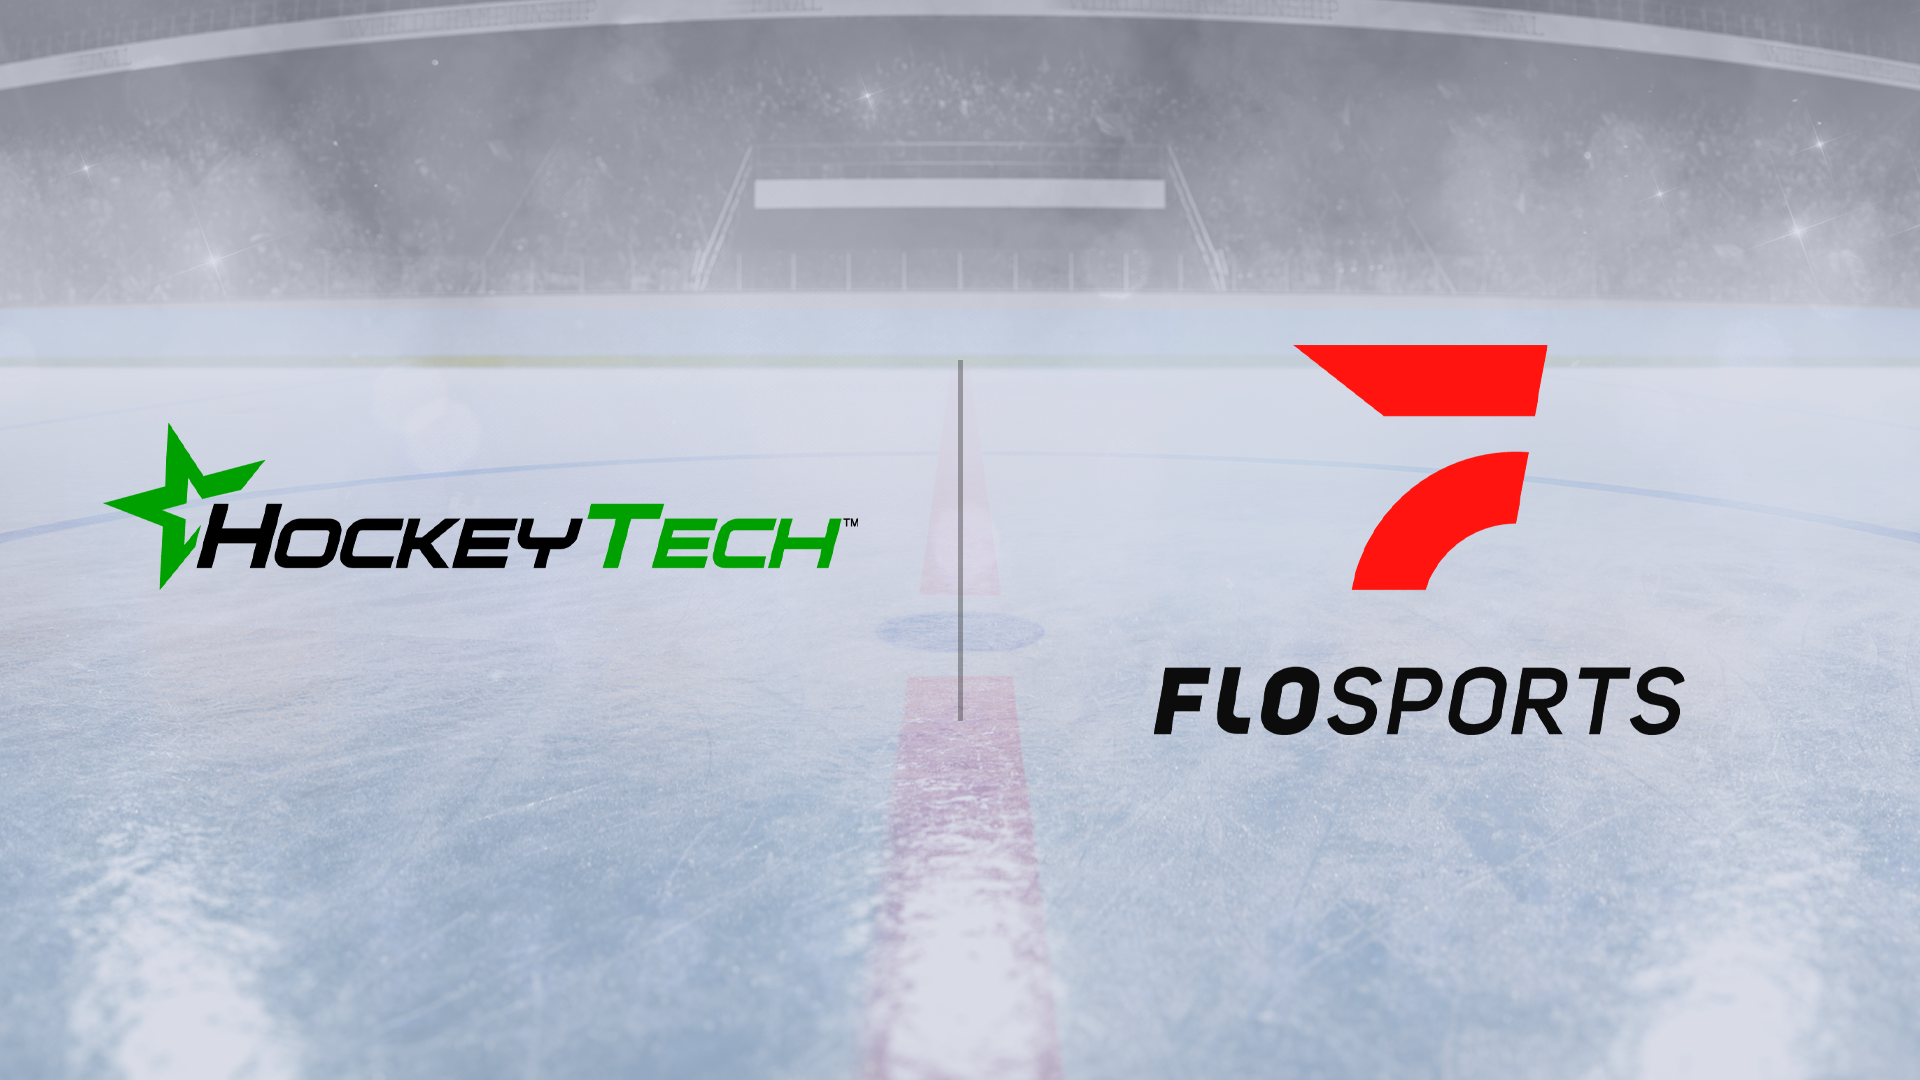 flosports bolsters its hockey offering with acquisition of hockeytech, a leading live and on-demand streaming platform and sports data provider